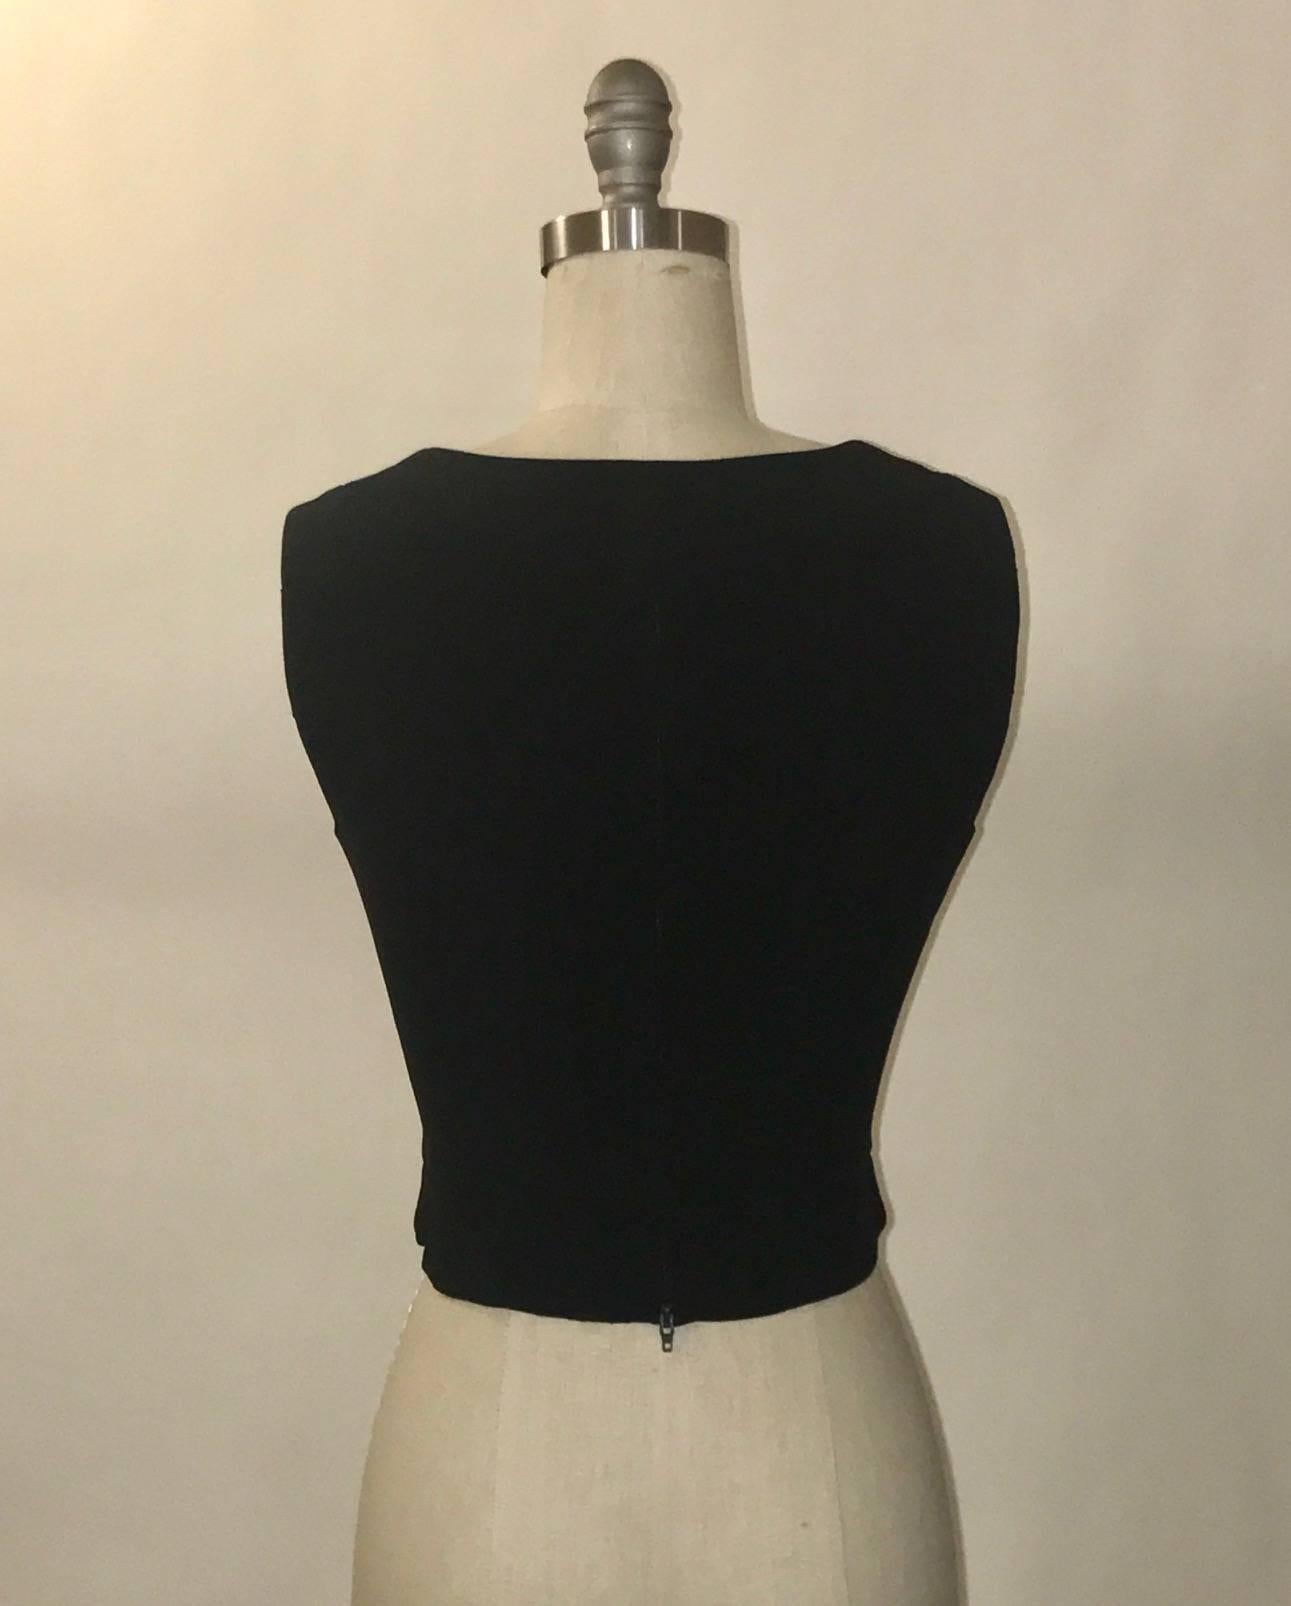 Moschino COUTURE! Repetita Juvant black vest with lace up front circa approximately 1993. Back zip. 

53% acetate, 47% rayon.
Fully lined in 60% acetate, 40% rayon.

Made in Italy.

Labelled size IT 44, US 10. Best fits modern 6/8, see